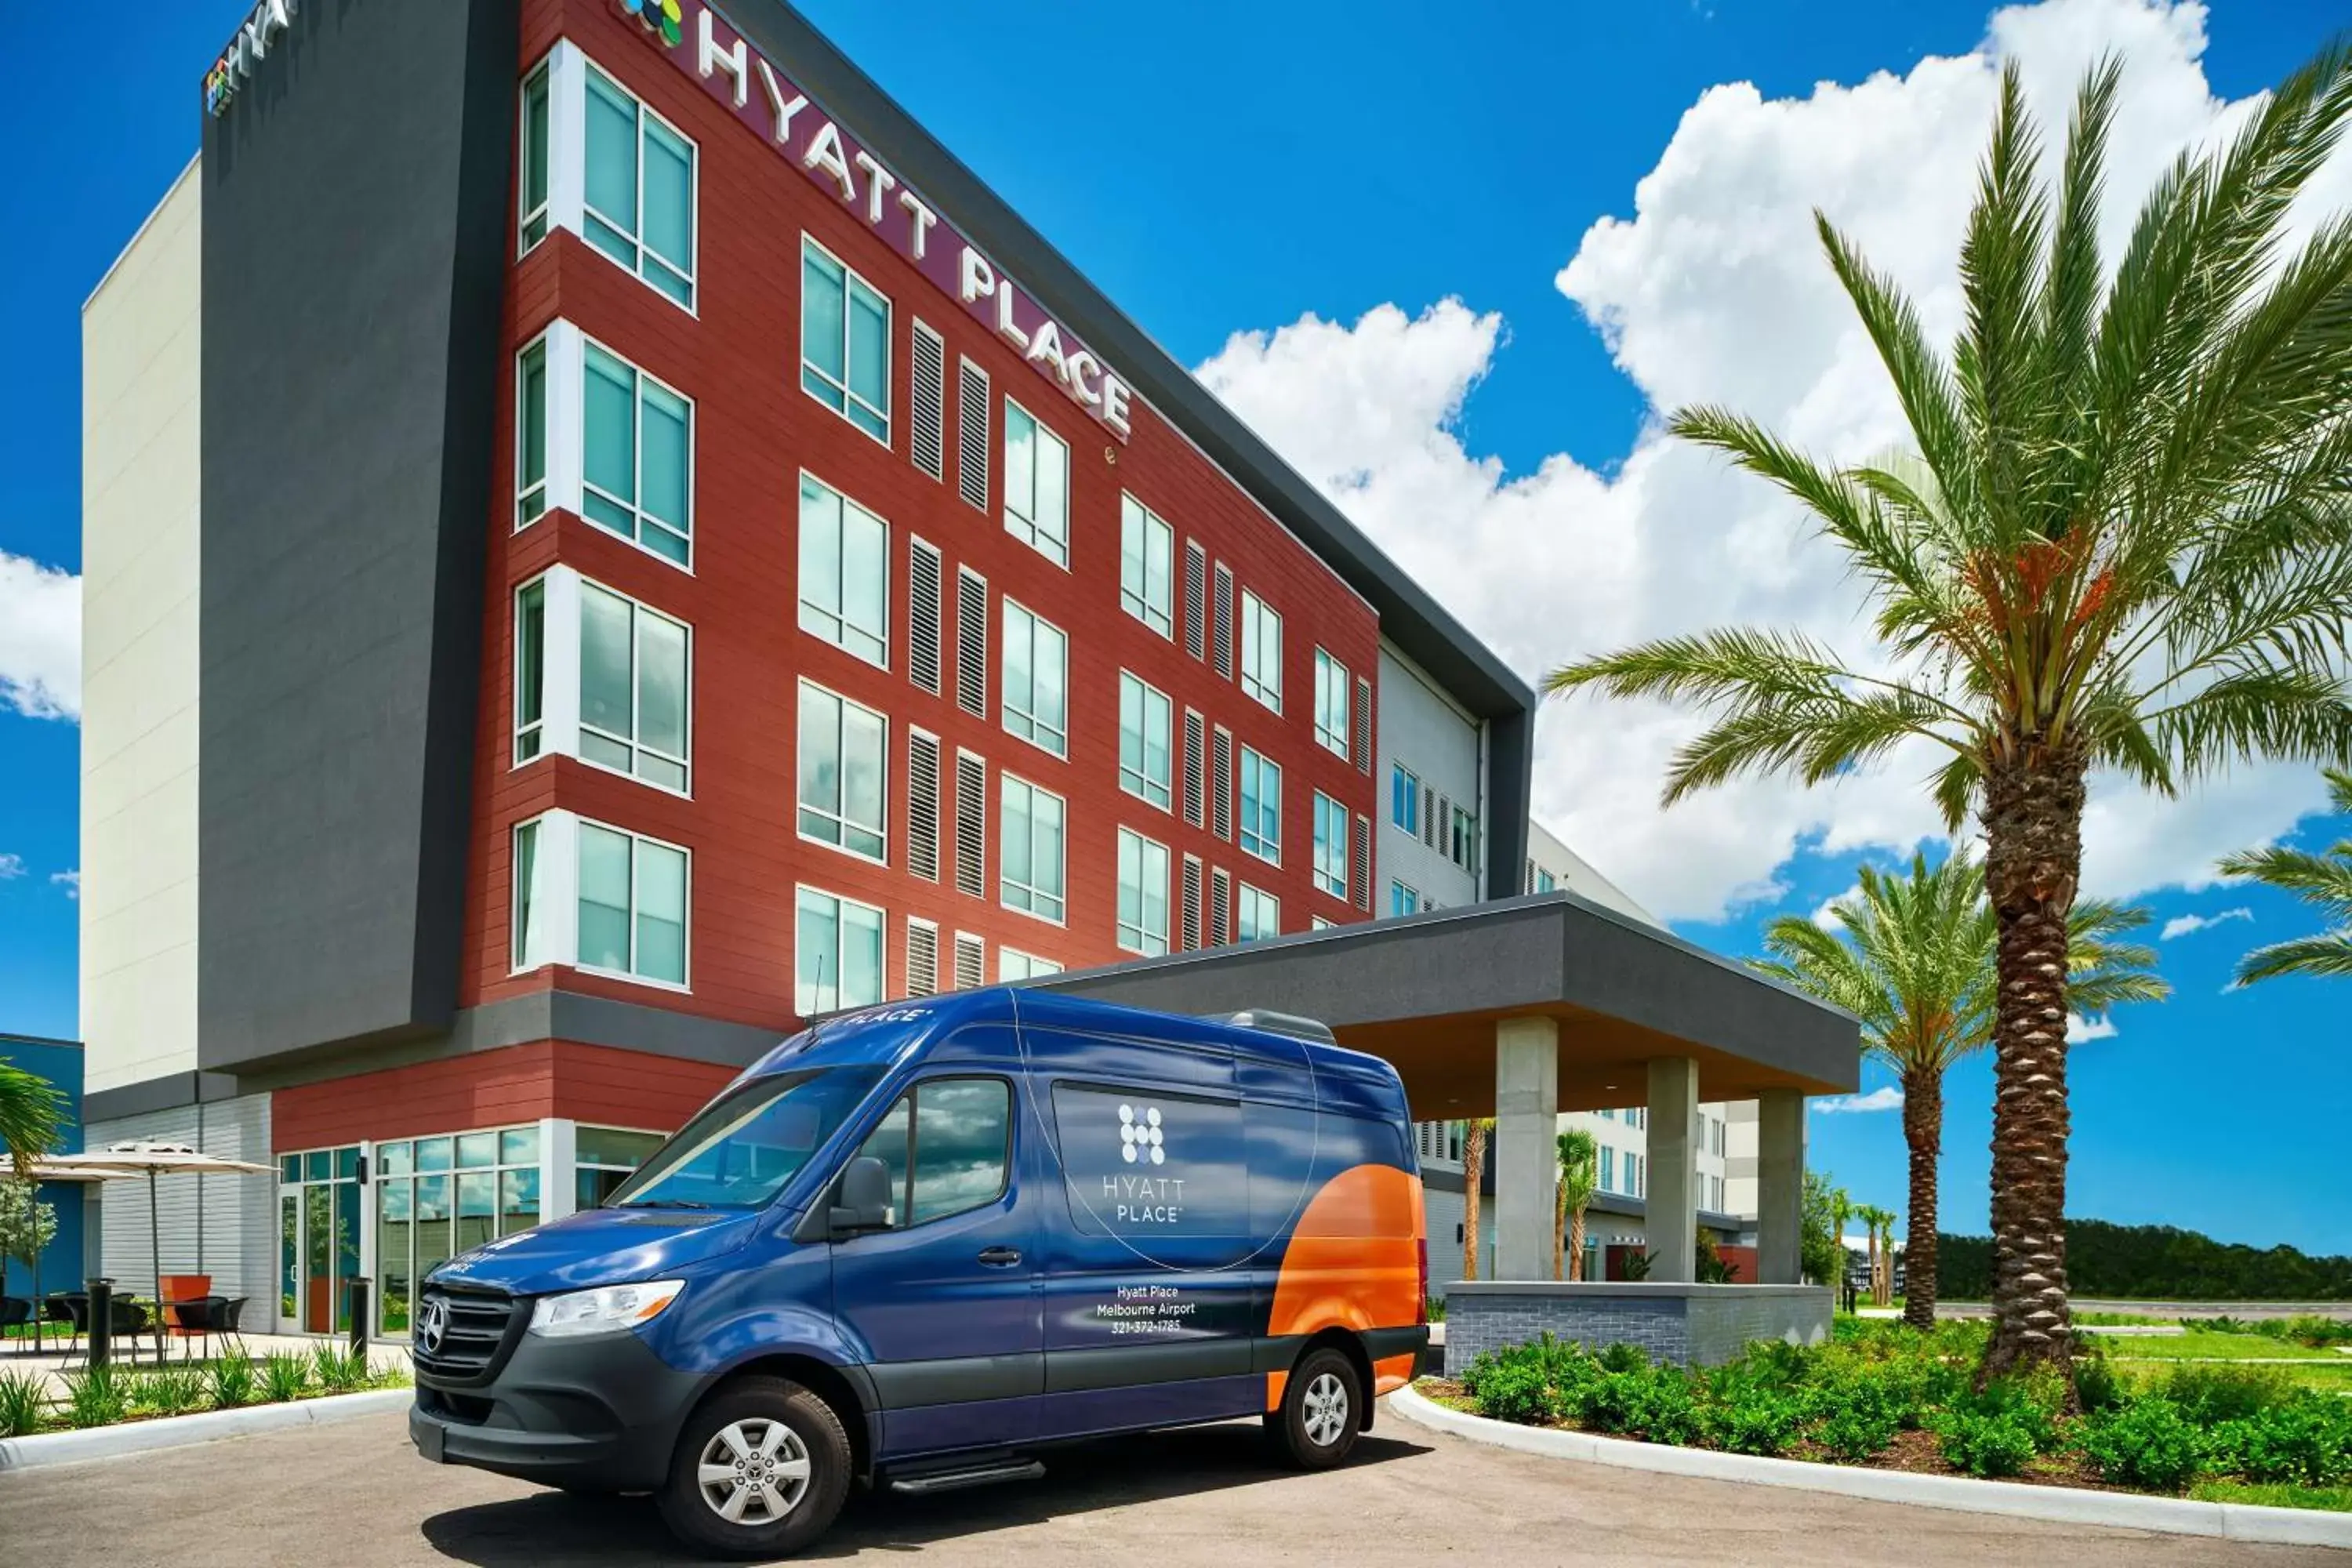 Location, Property Building in Hyatt Place Melbourne Airport, Fl